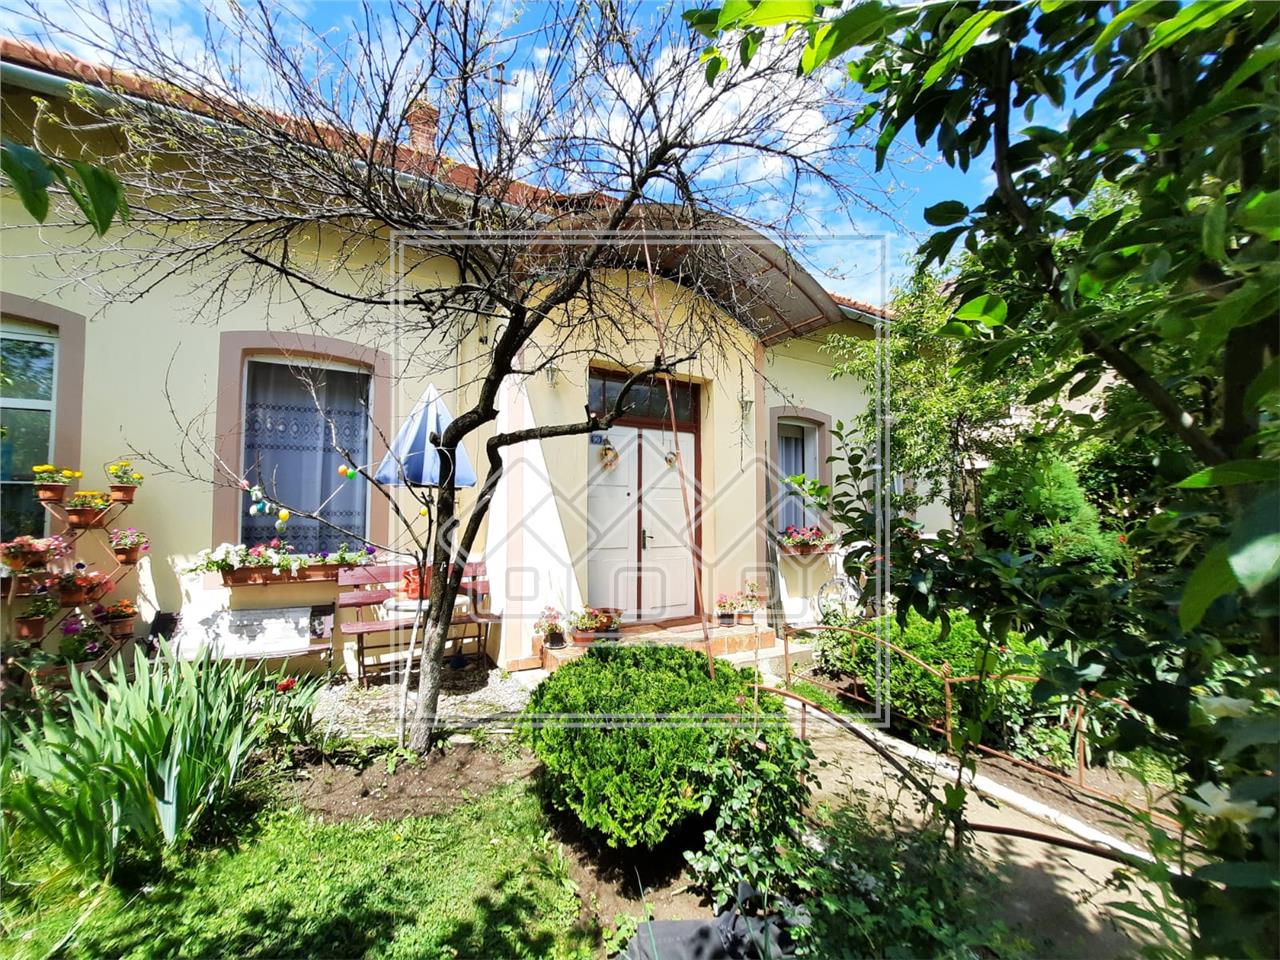 House for sale in Sibiu - Cisnadie - Individual - 660sqm land - 22ml e